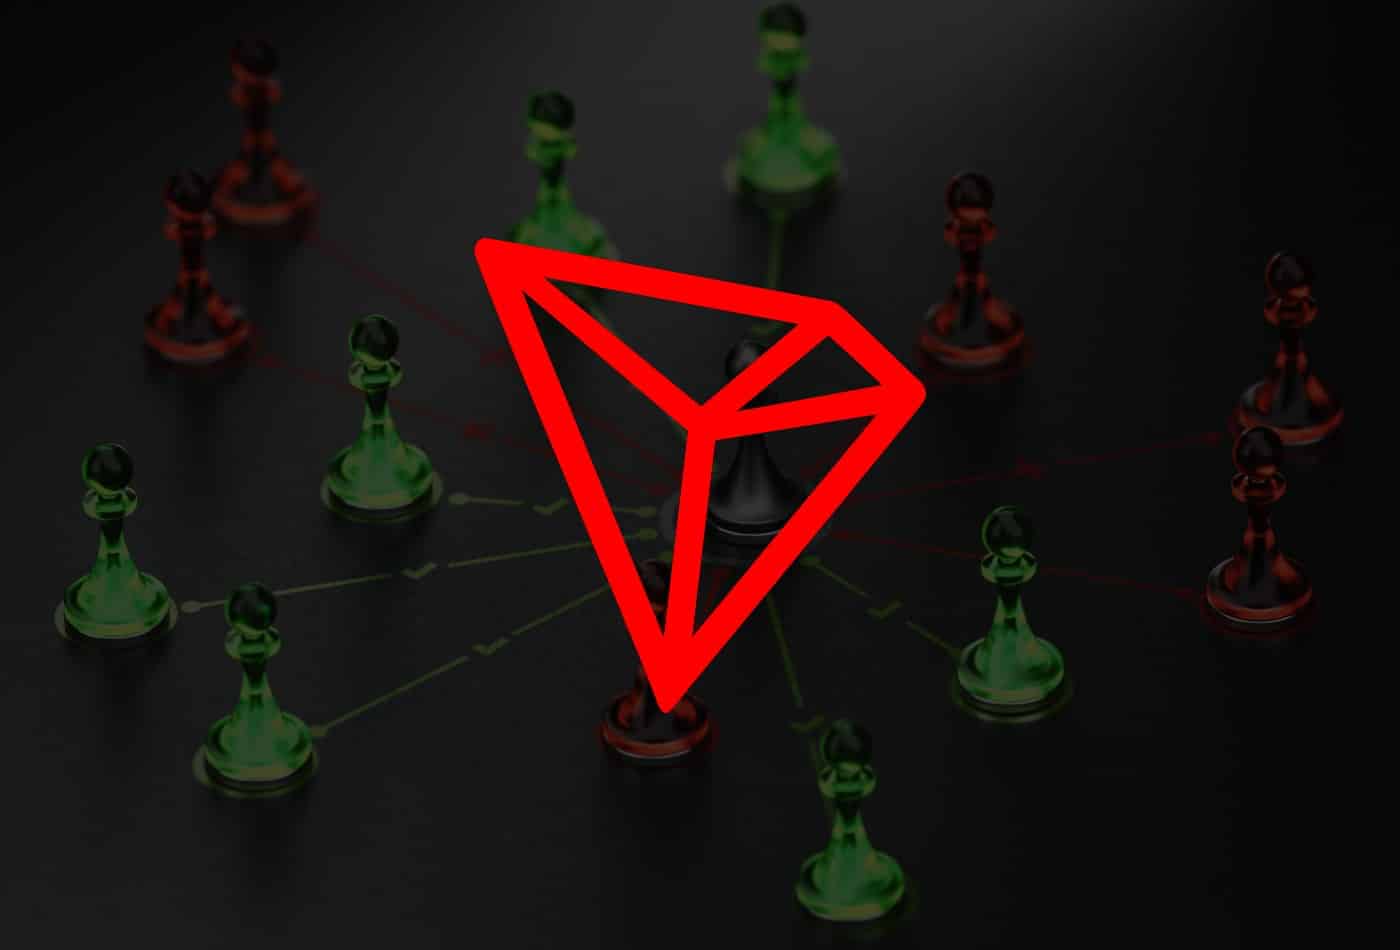 TRON Price Prediction From 2022 To 2030: Is It On Discount?